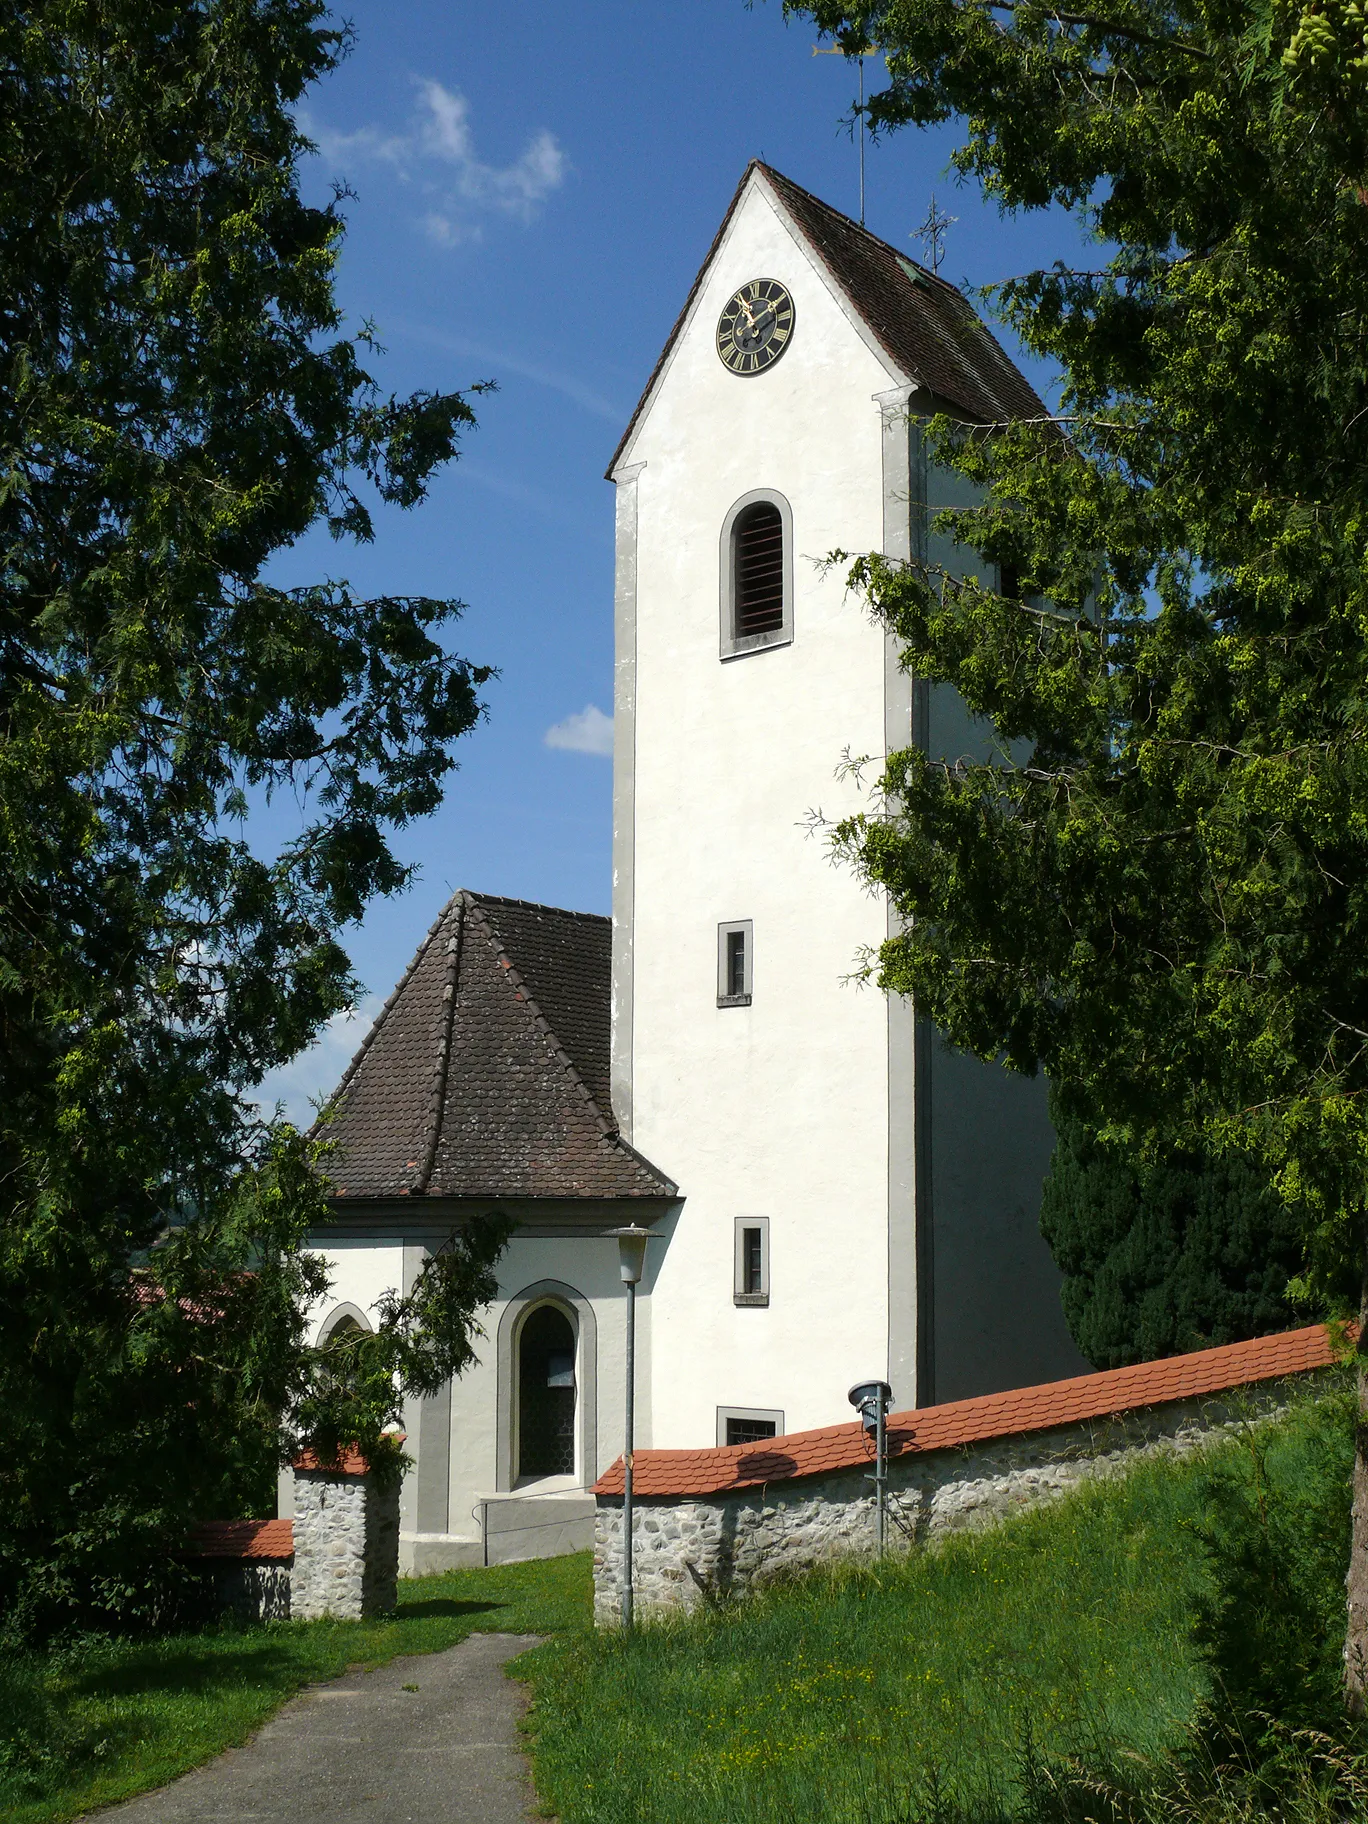 Photo showing: View of the Saint Pancratius Church in Altheim, a district of Frickingen (Baden-Württemberg, Germany), from the east side.